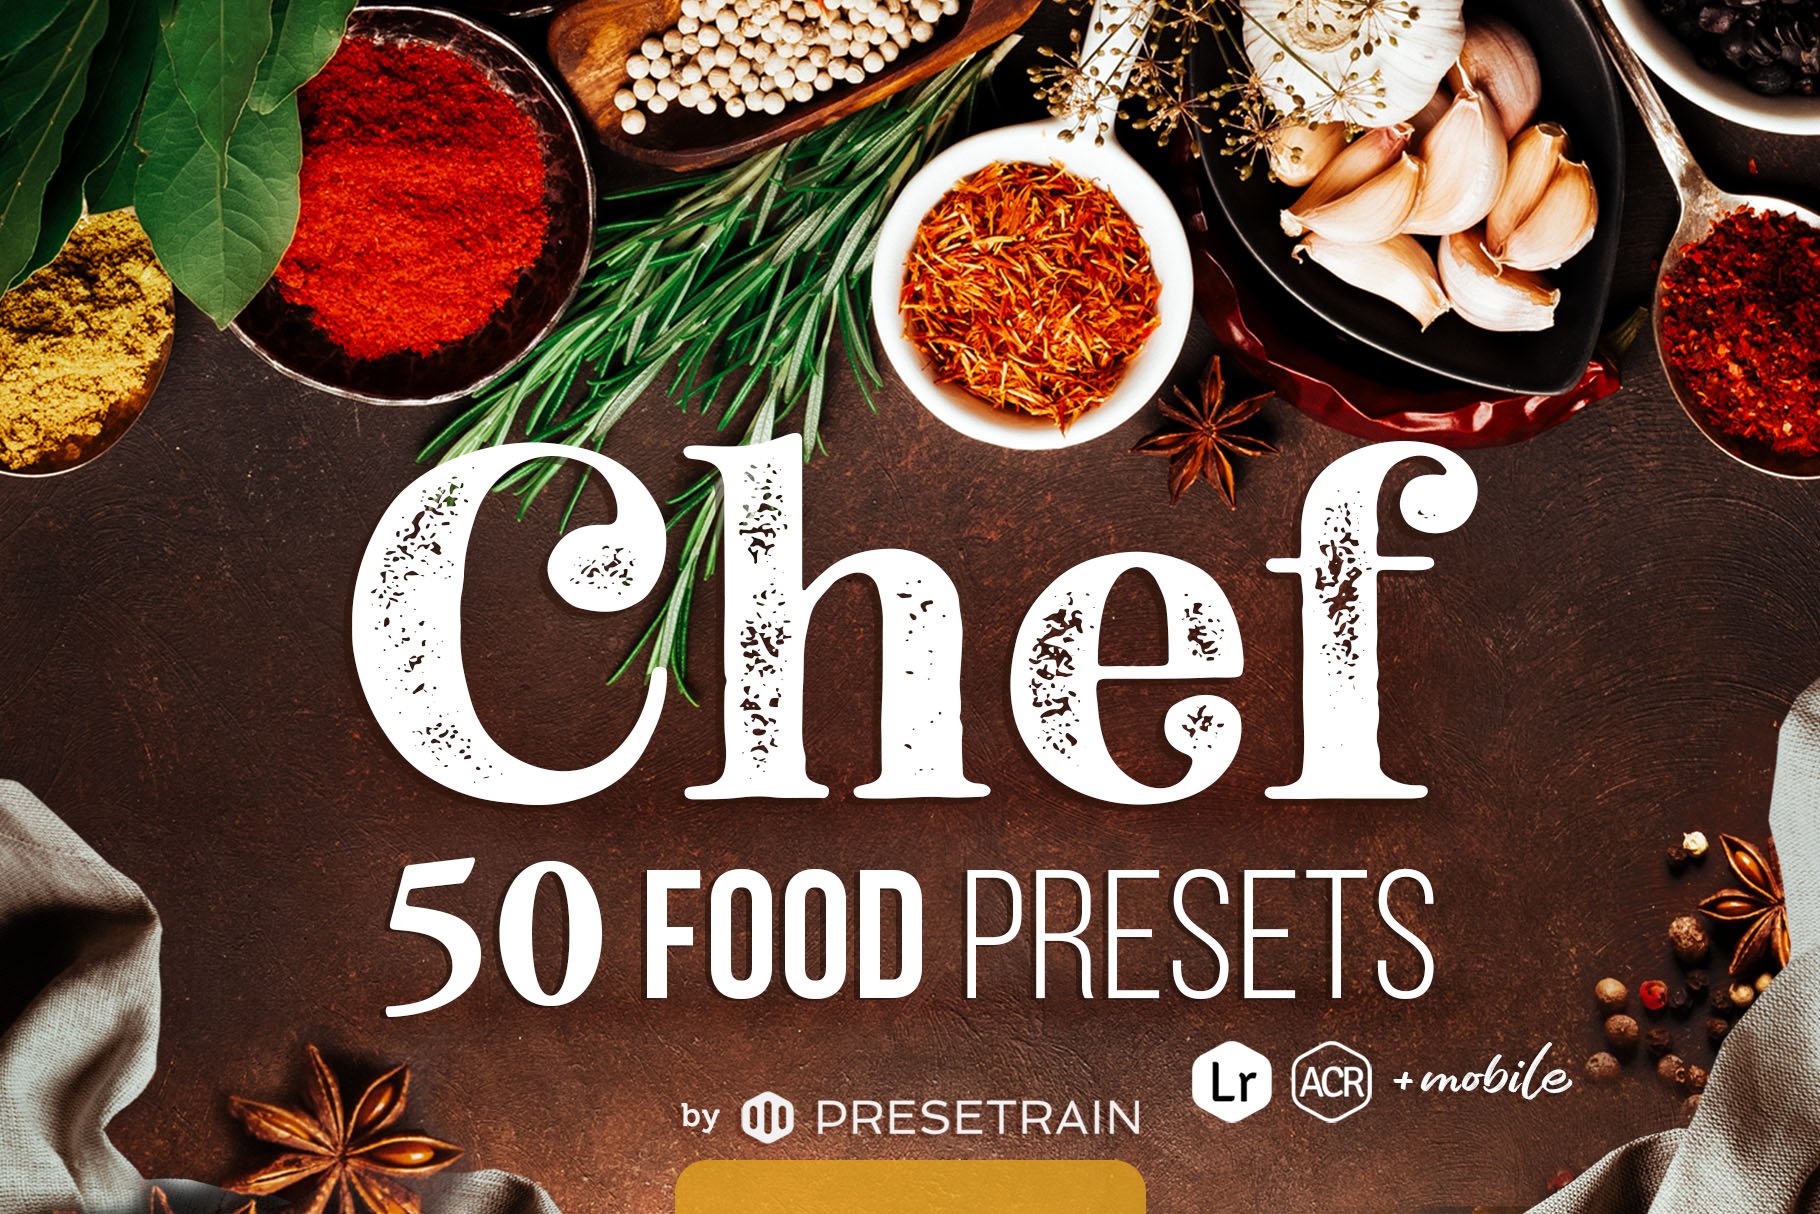 Chef - 50 Food Presetscover image.